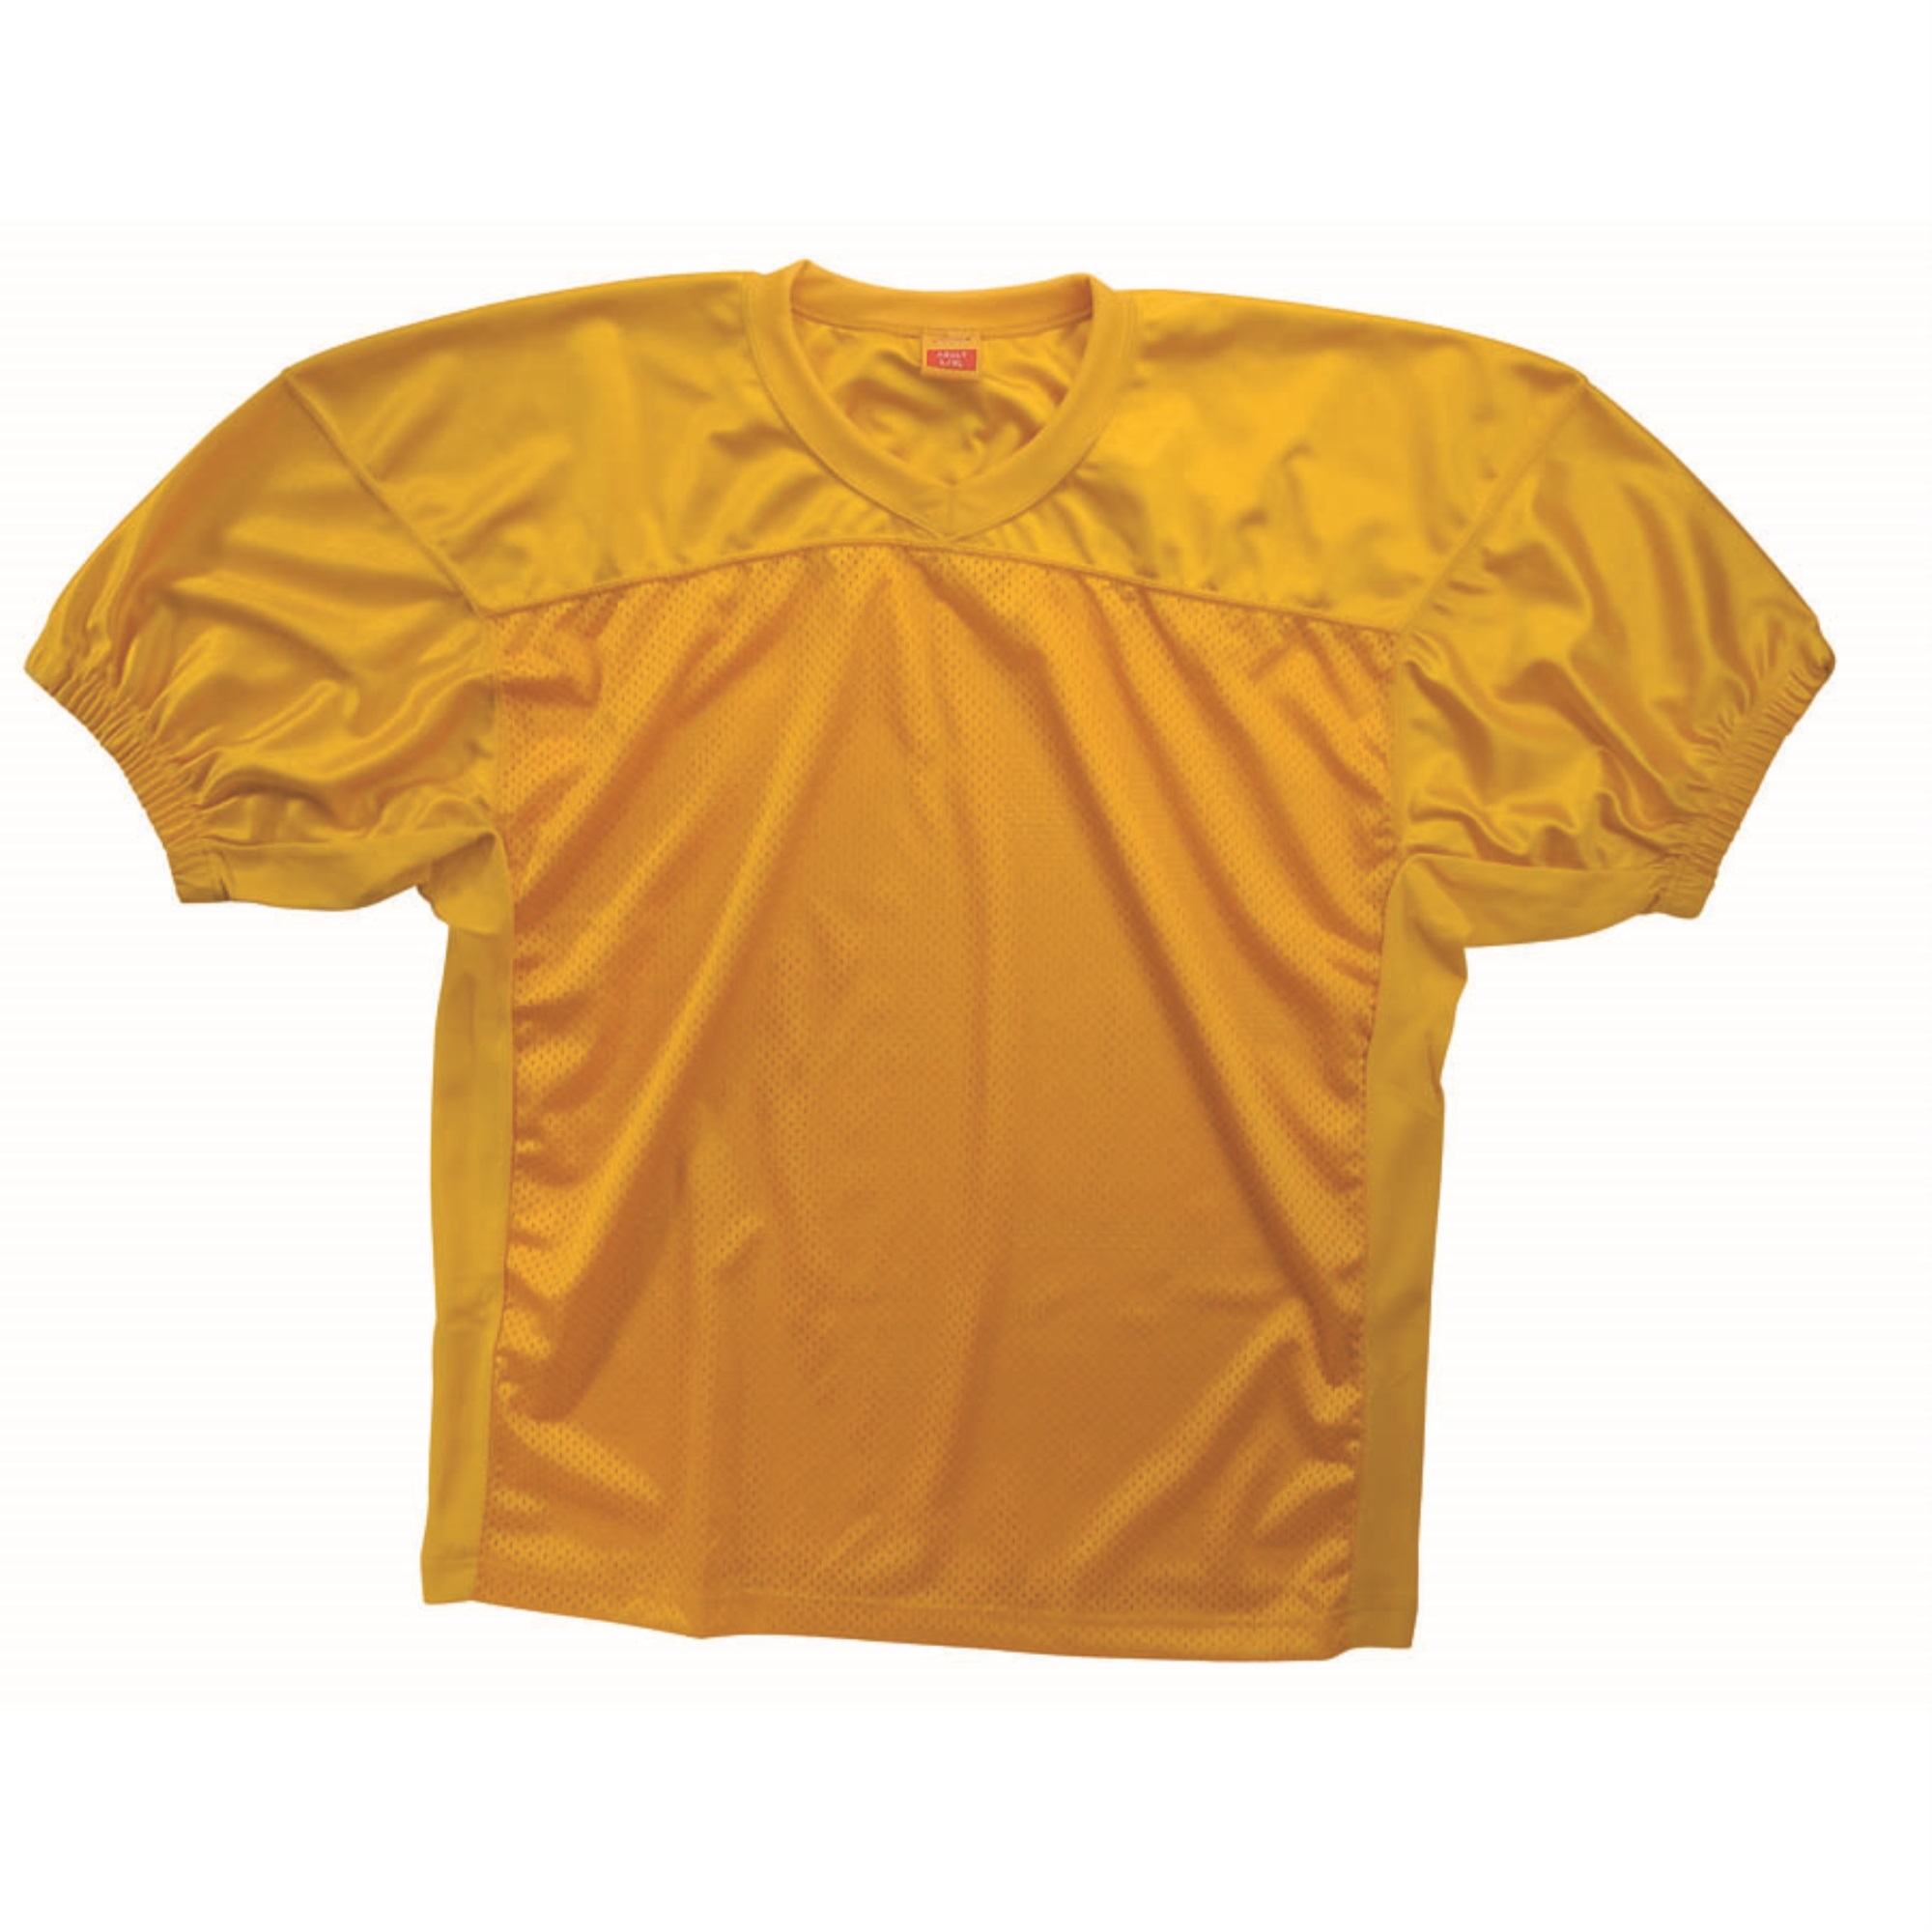 Martin Sports GAME FB JERSEY-GOLD-SM